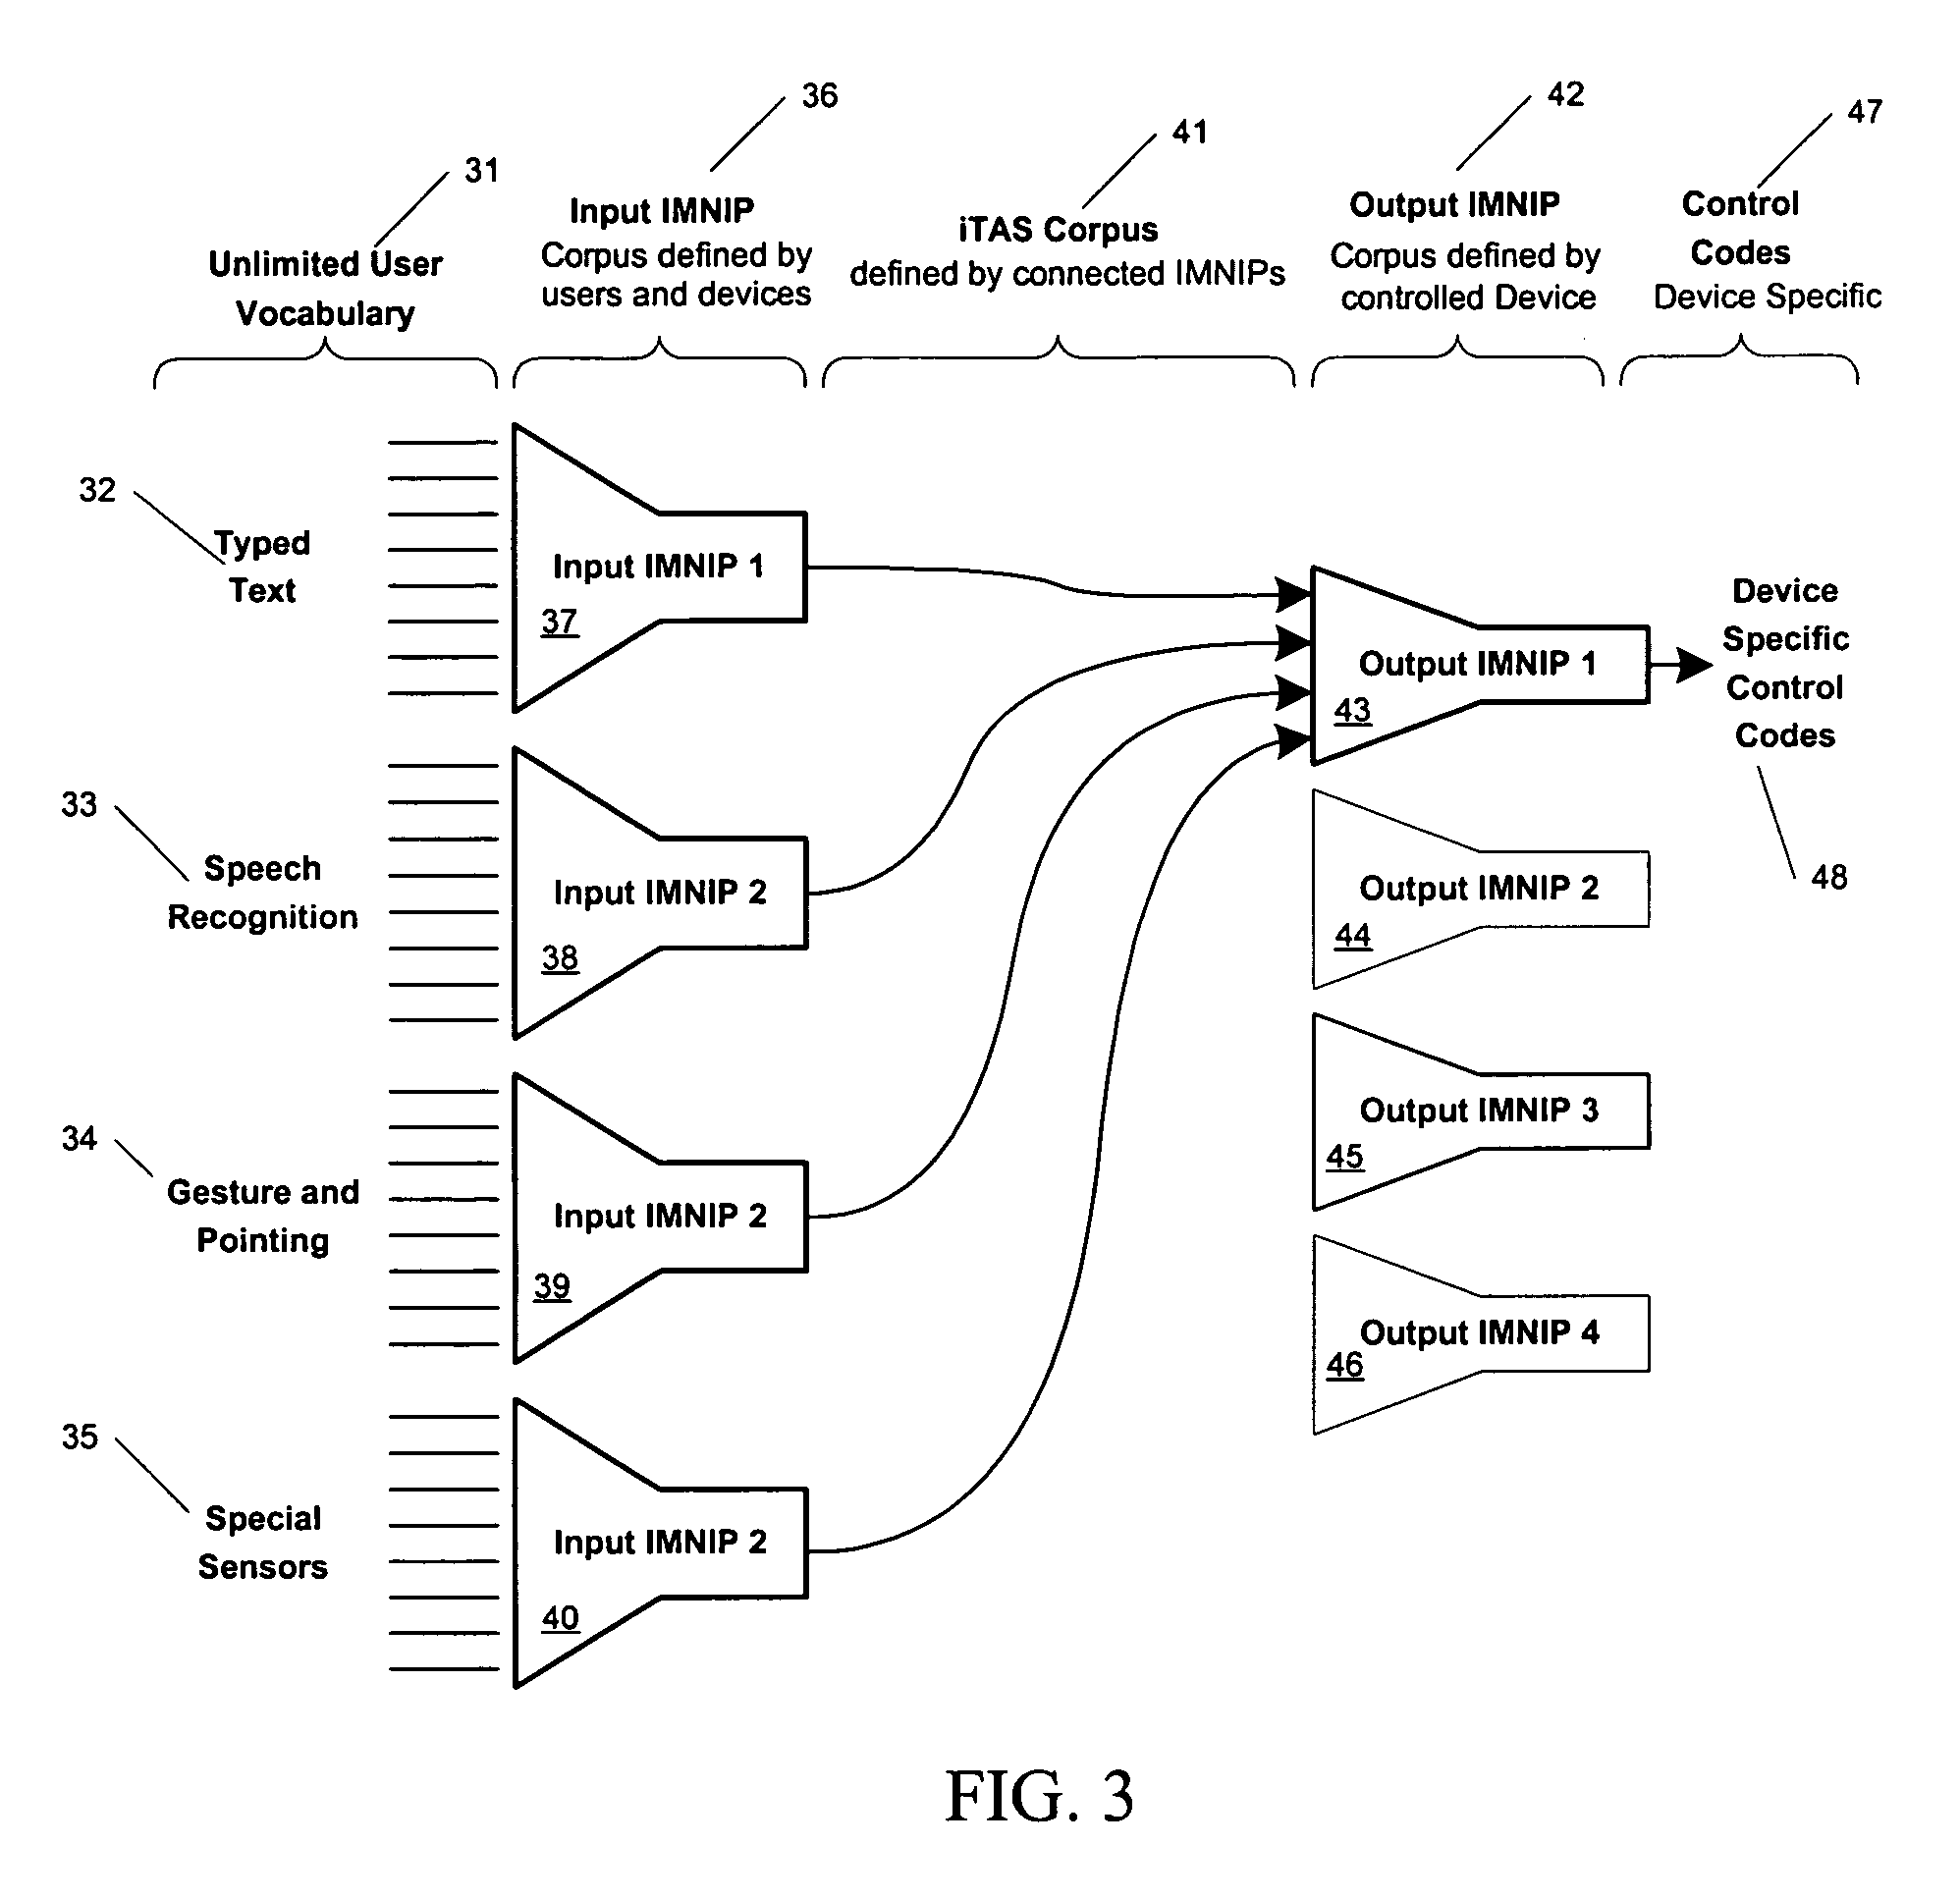 Integration manager and natural interaction processor